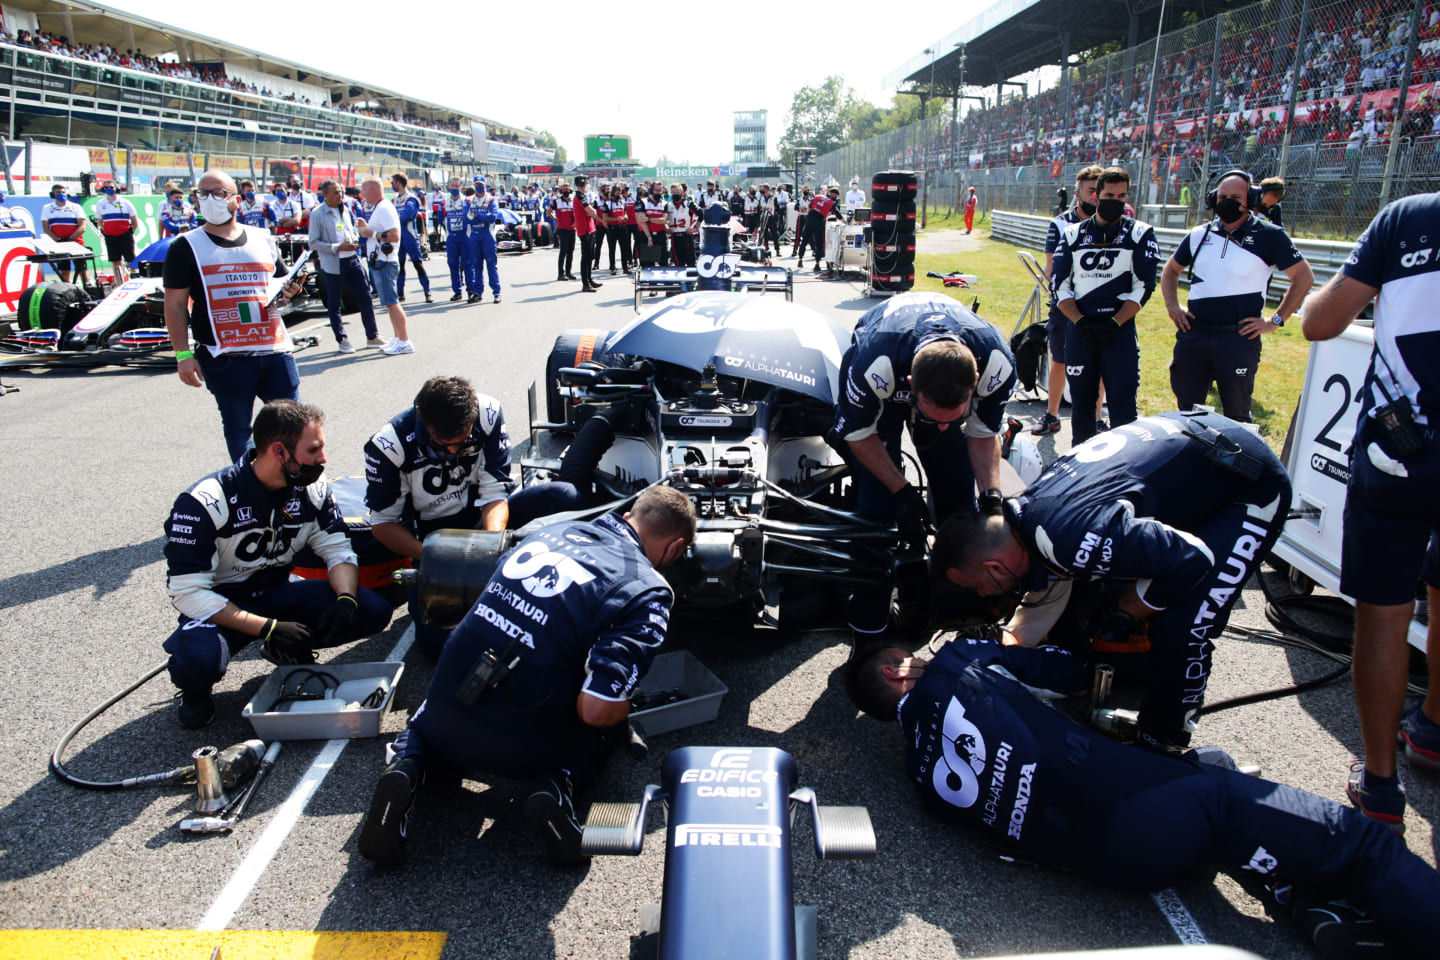 MONZA, ITALY - SEPTEMBER 12: The Scuderia AlphaTauri team work on the grid during the F1 Grand Prix